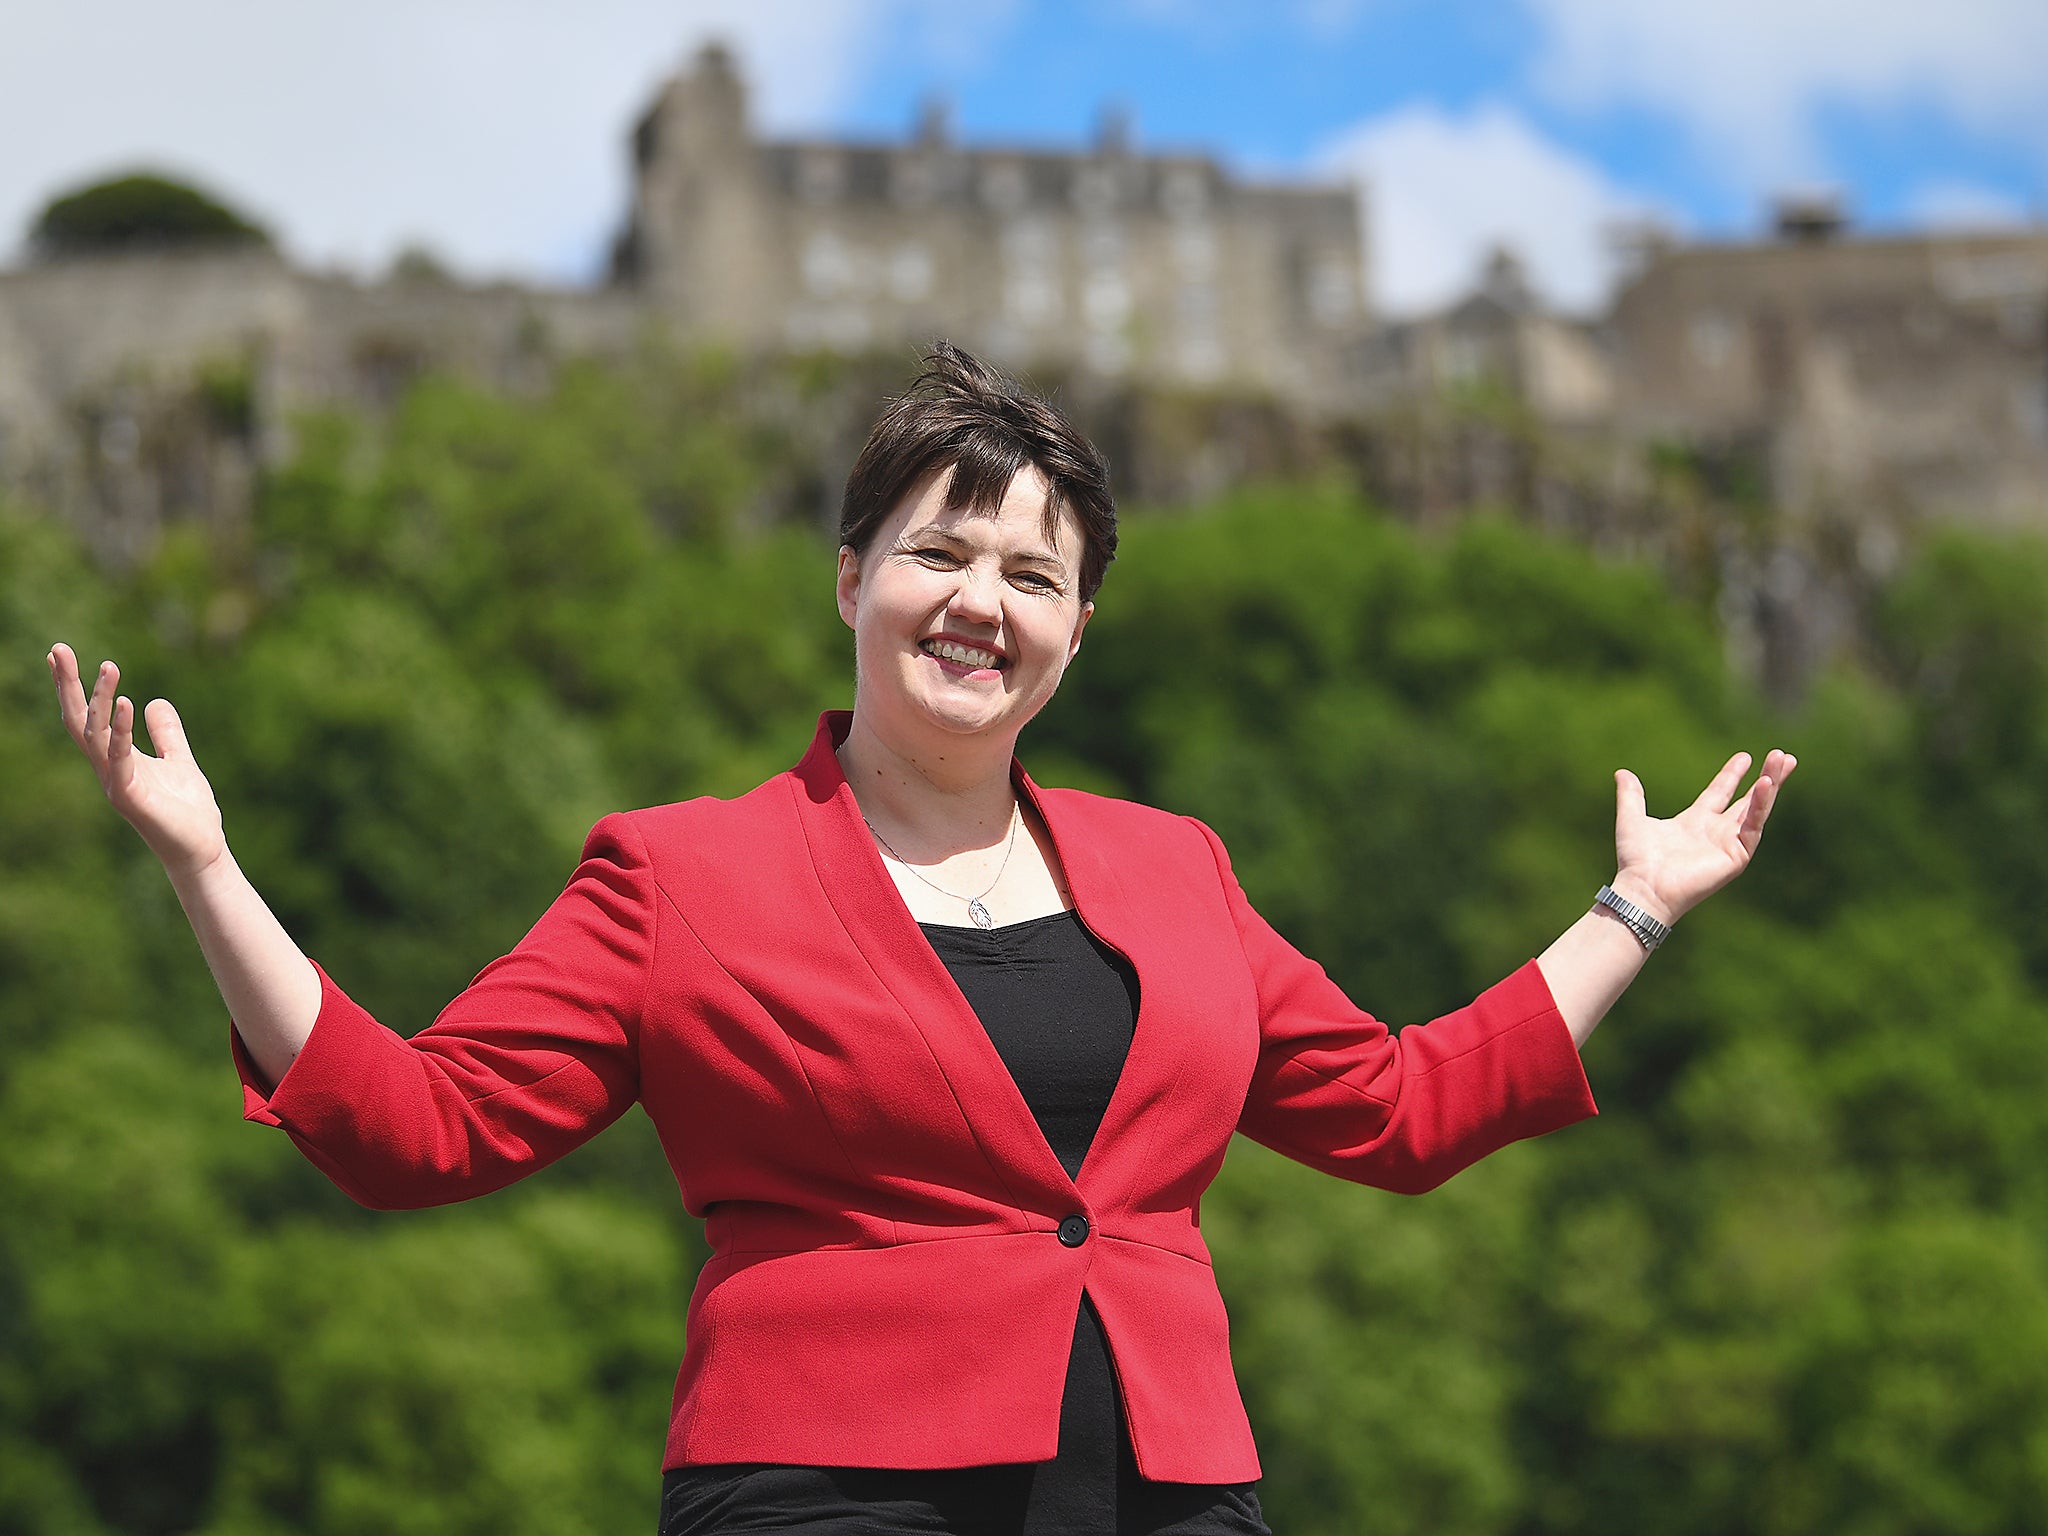 Ruth Davidson saved the Conservative Party from electoral oblivion in Scotland